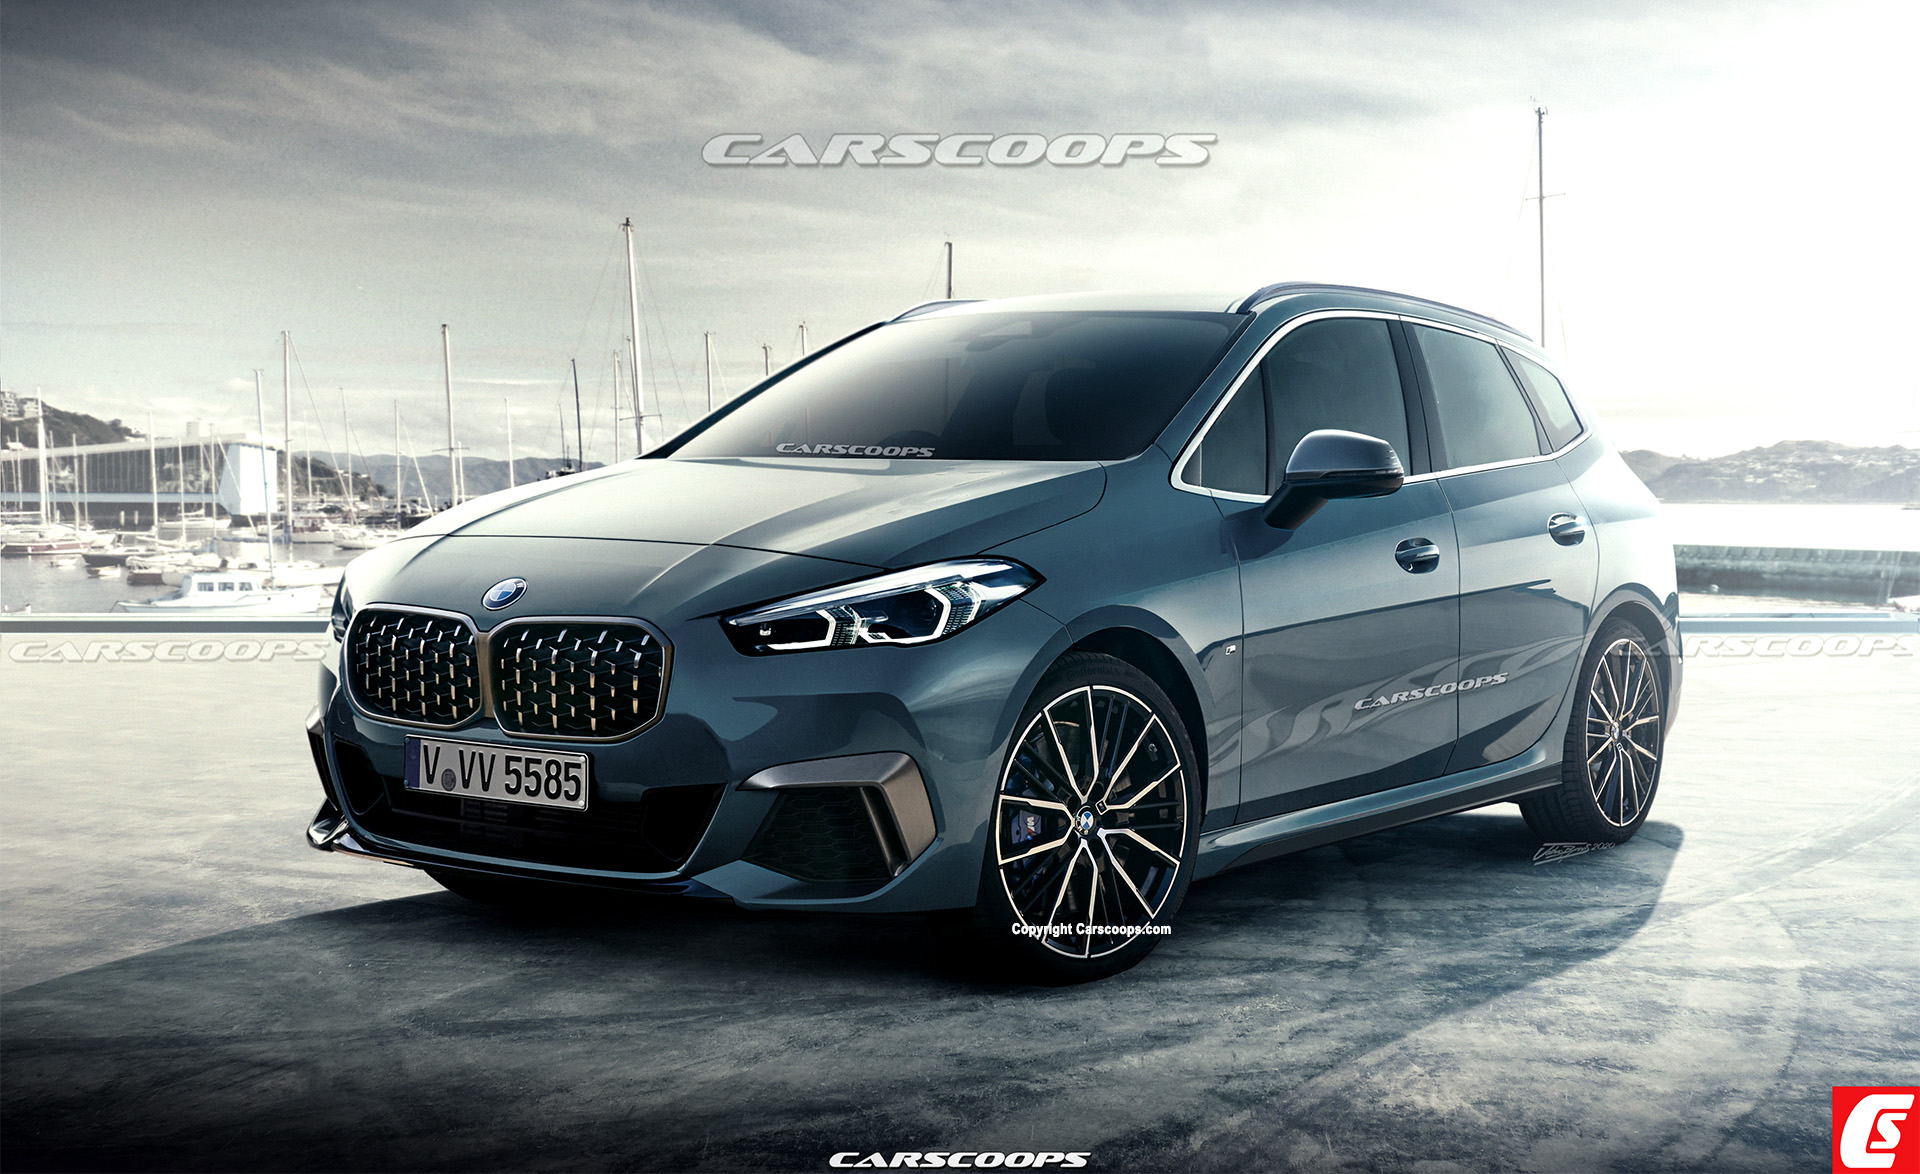 2021 Bmw 2 Series Active Tourer Engines Technology Everything Else We Know Carscoops